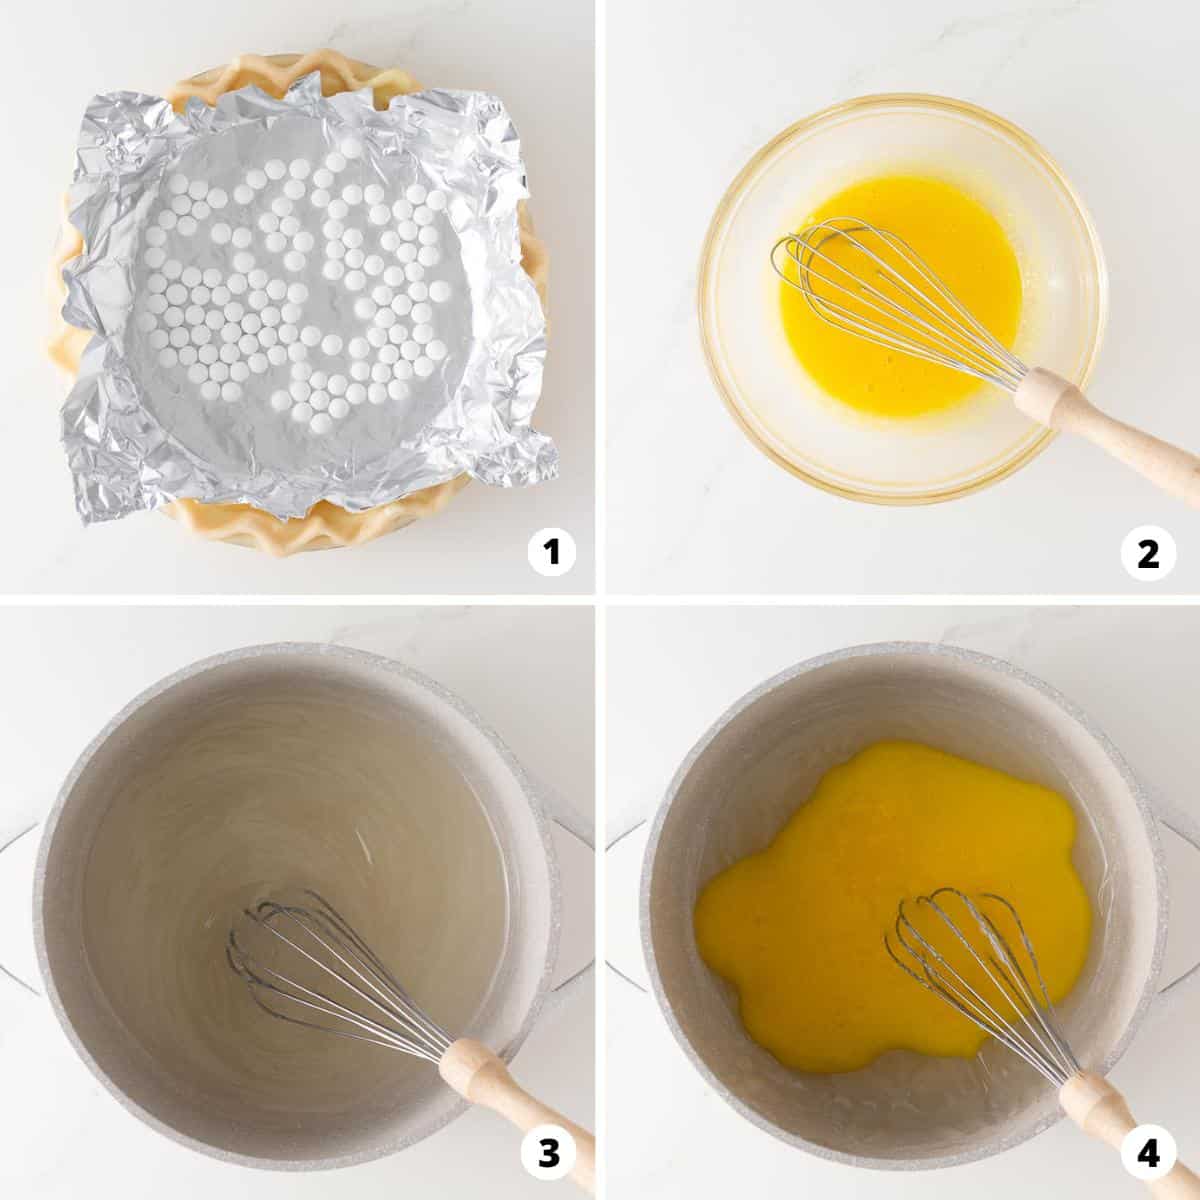 Showing how to make lemon meringue pie in a 4 step collage.